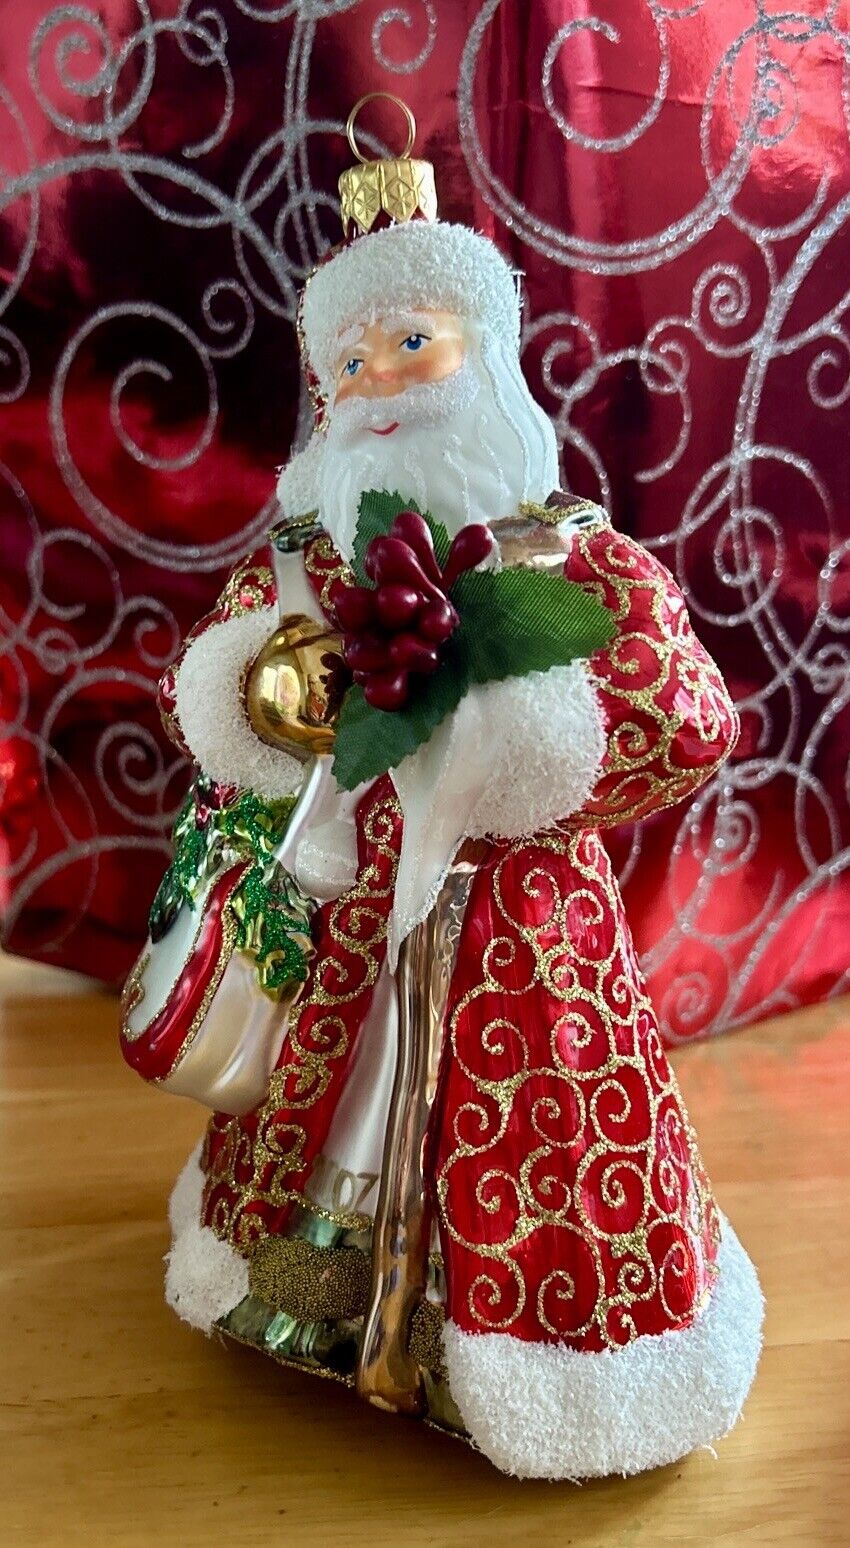 2007 Trimmings Santa Christmas Ornament Handcrafted Blown Glass Made In Poland